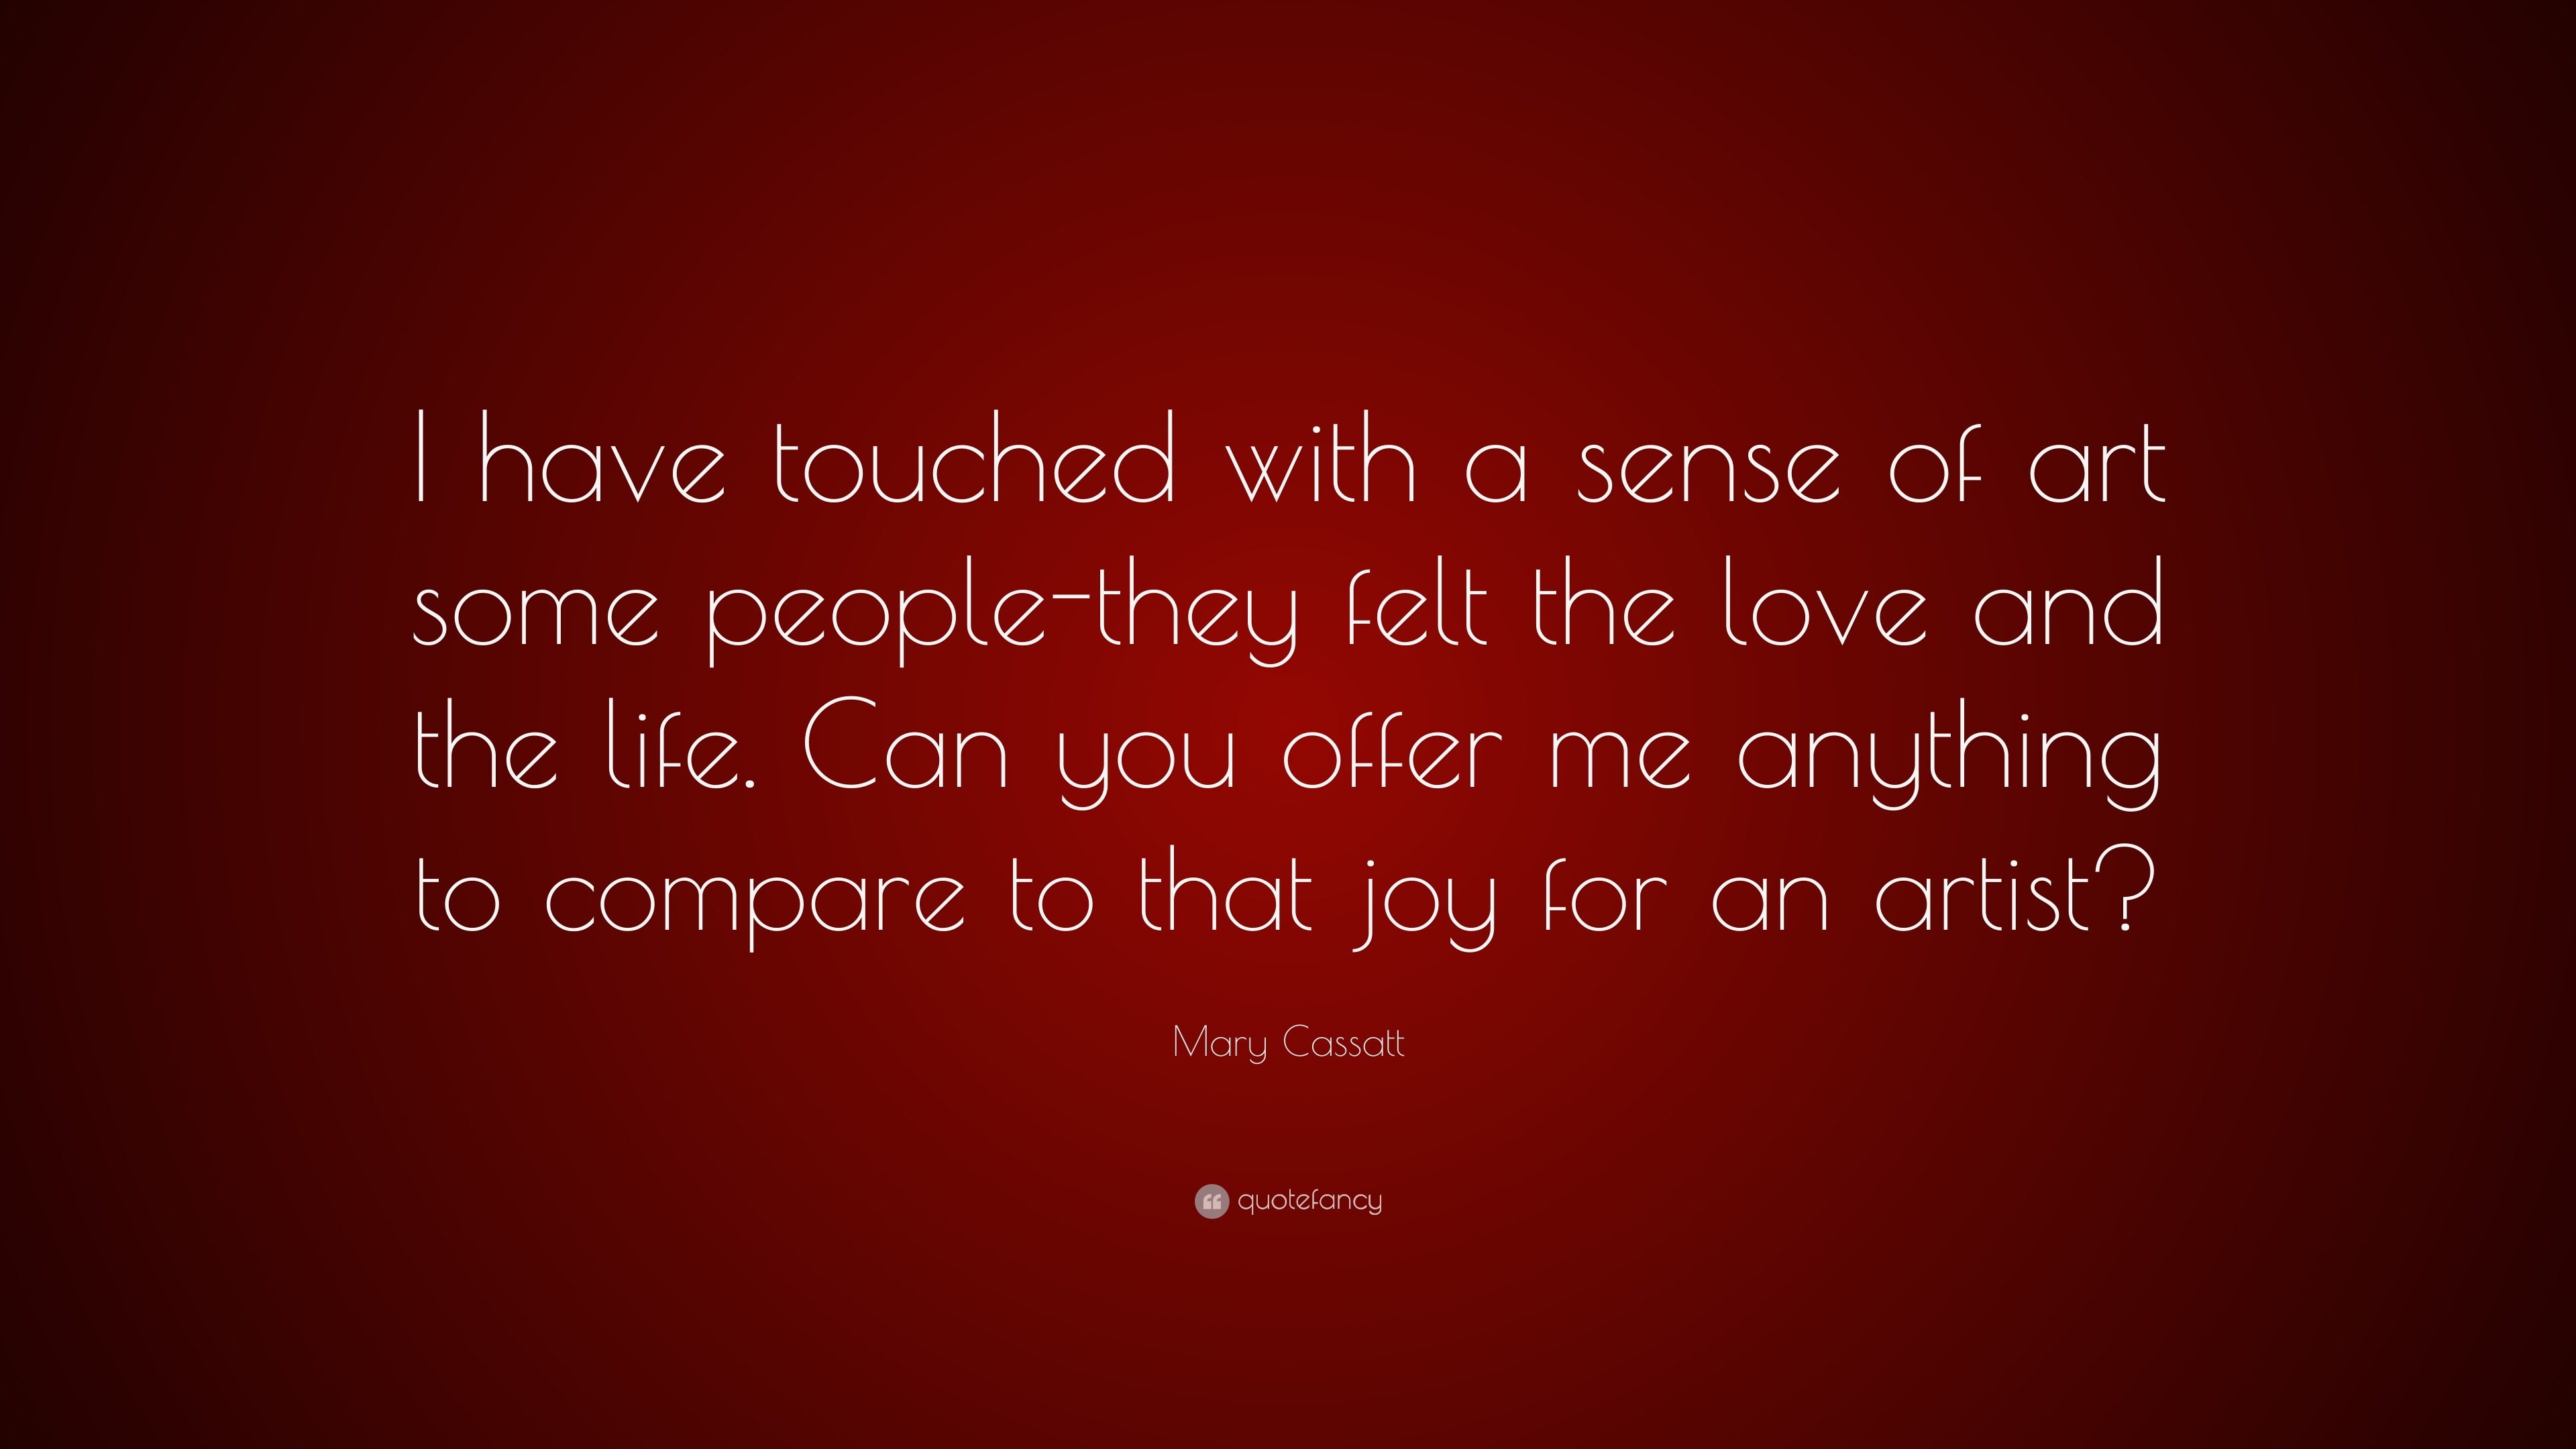 Mary Cassatt Quote “I have touched with a sense of art some people